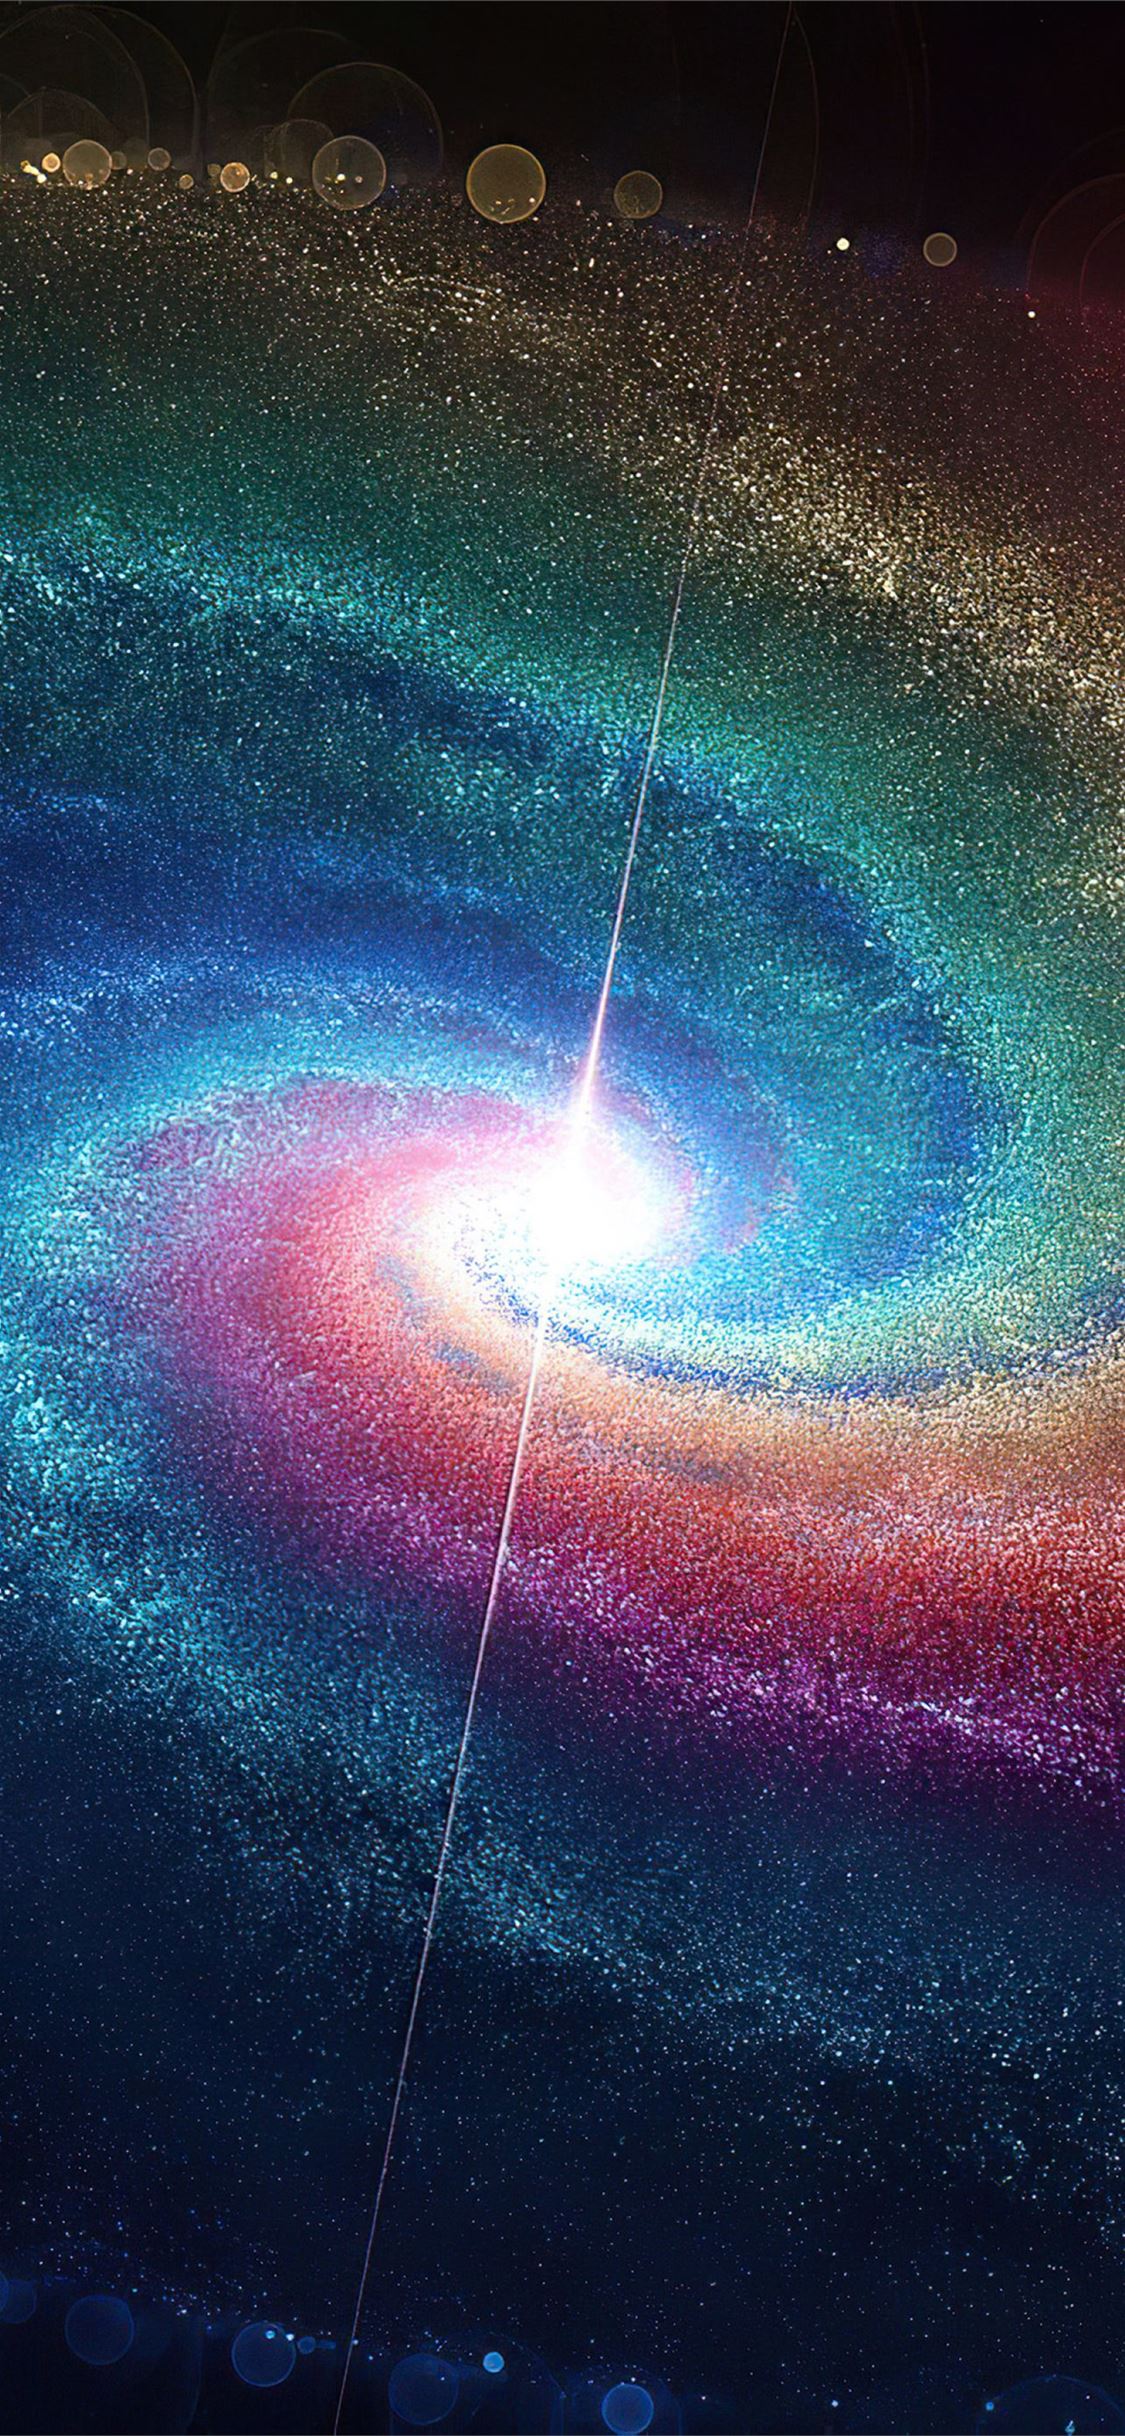 Android Wallpaper: Not that Galaxy - Phandroid